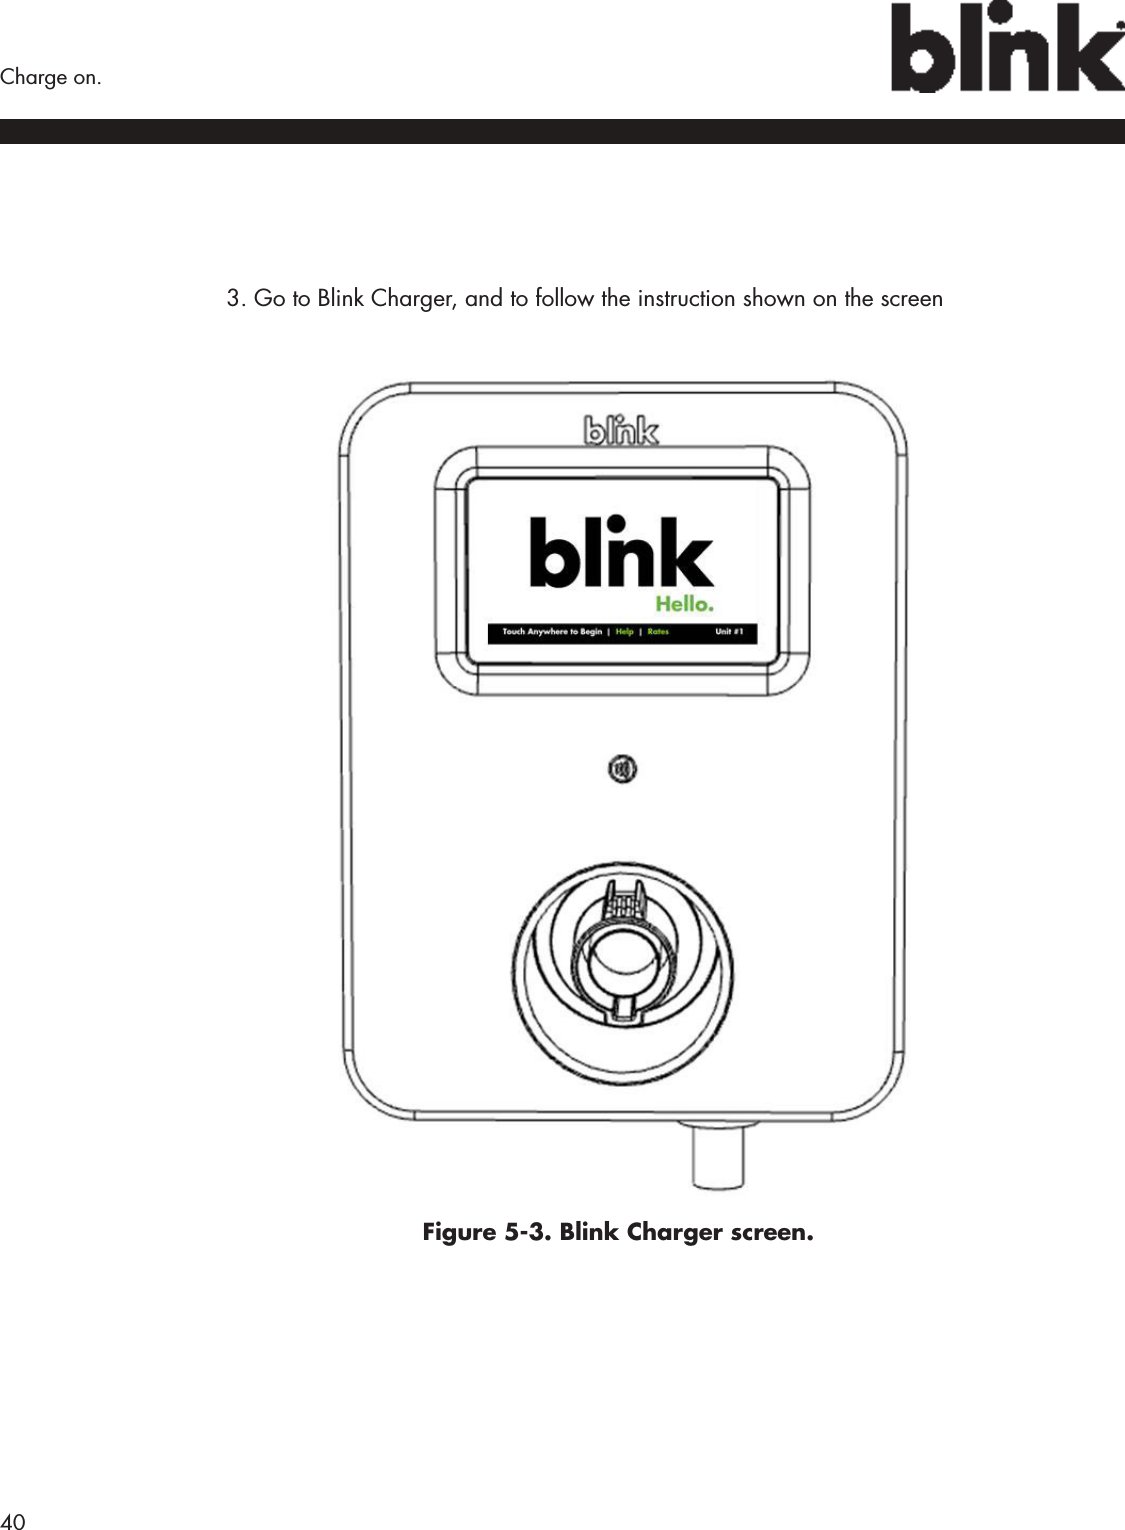 40  Charge on.3. Go to Blink Charger, and to follow the instruction shown on the screenFigure 5-3. Blink Charger screen.